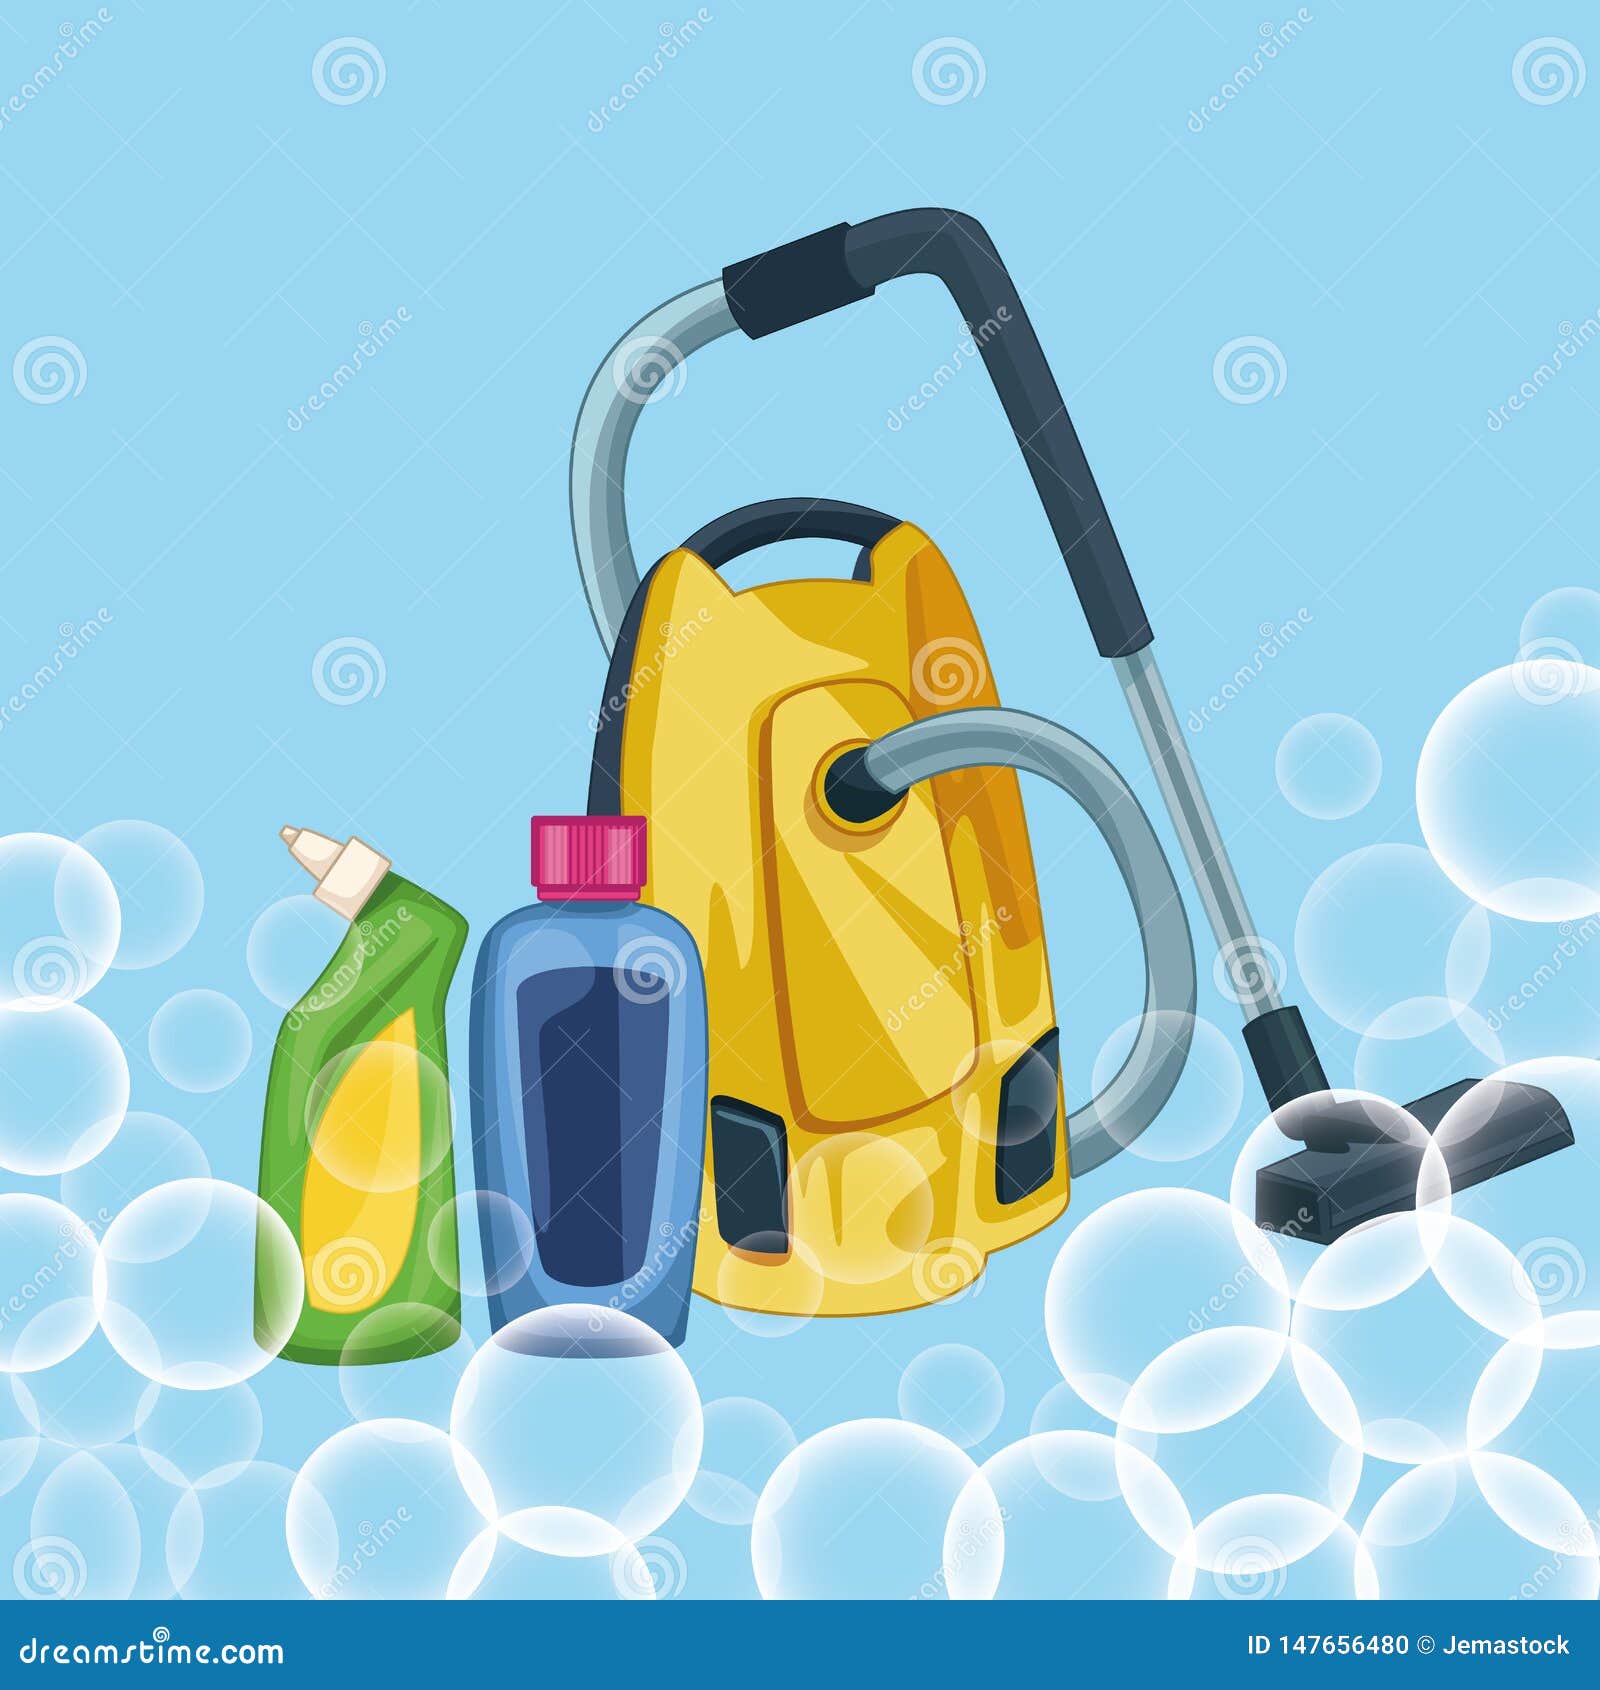 Housekeeping Cleaning Cartoon Stock Vector - Illustration of housecleaning,  service: 147656480